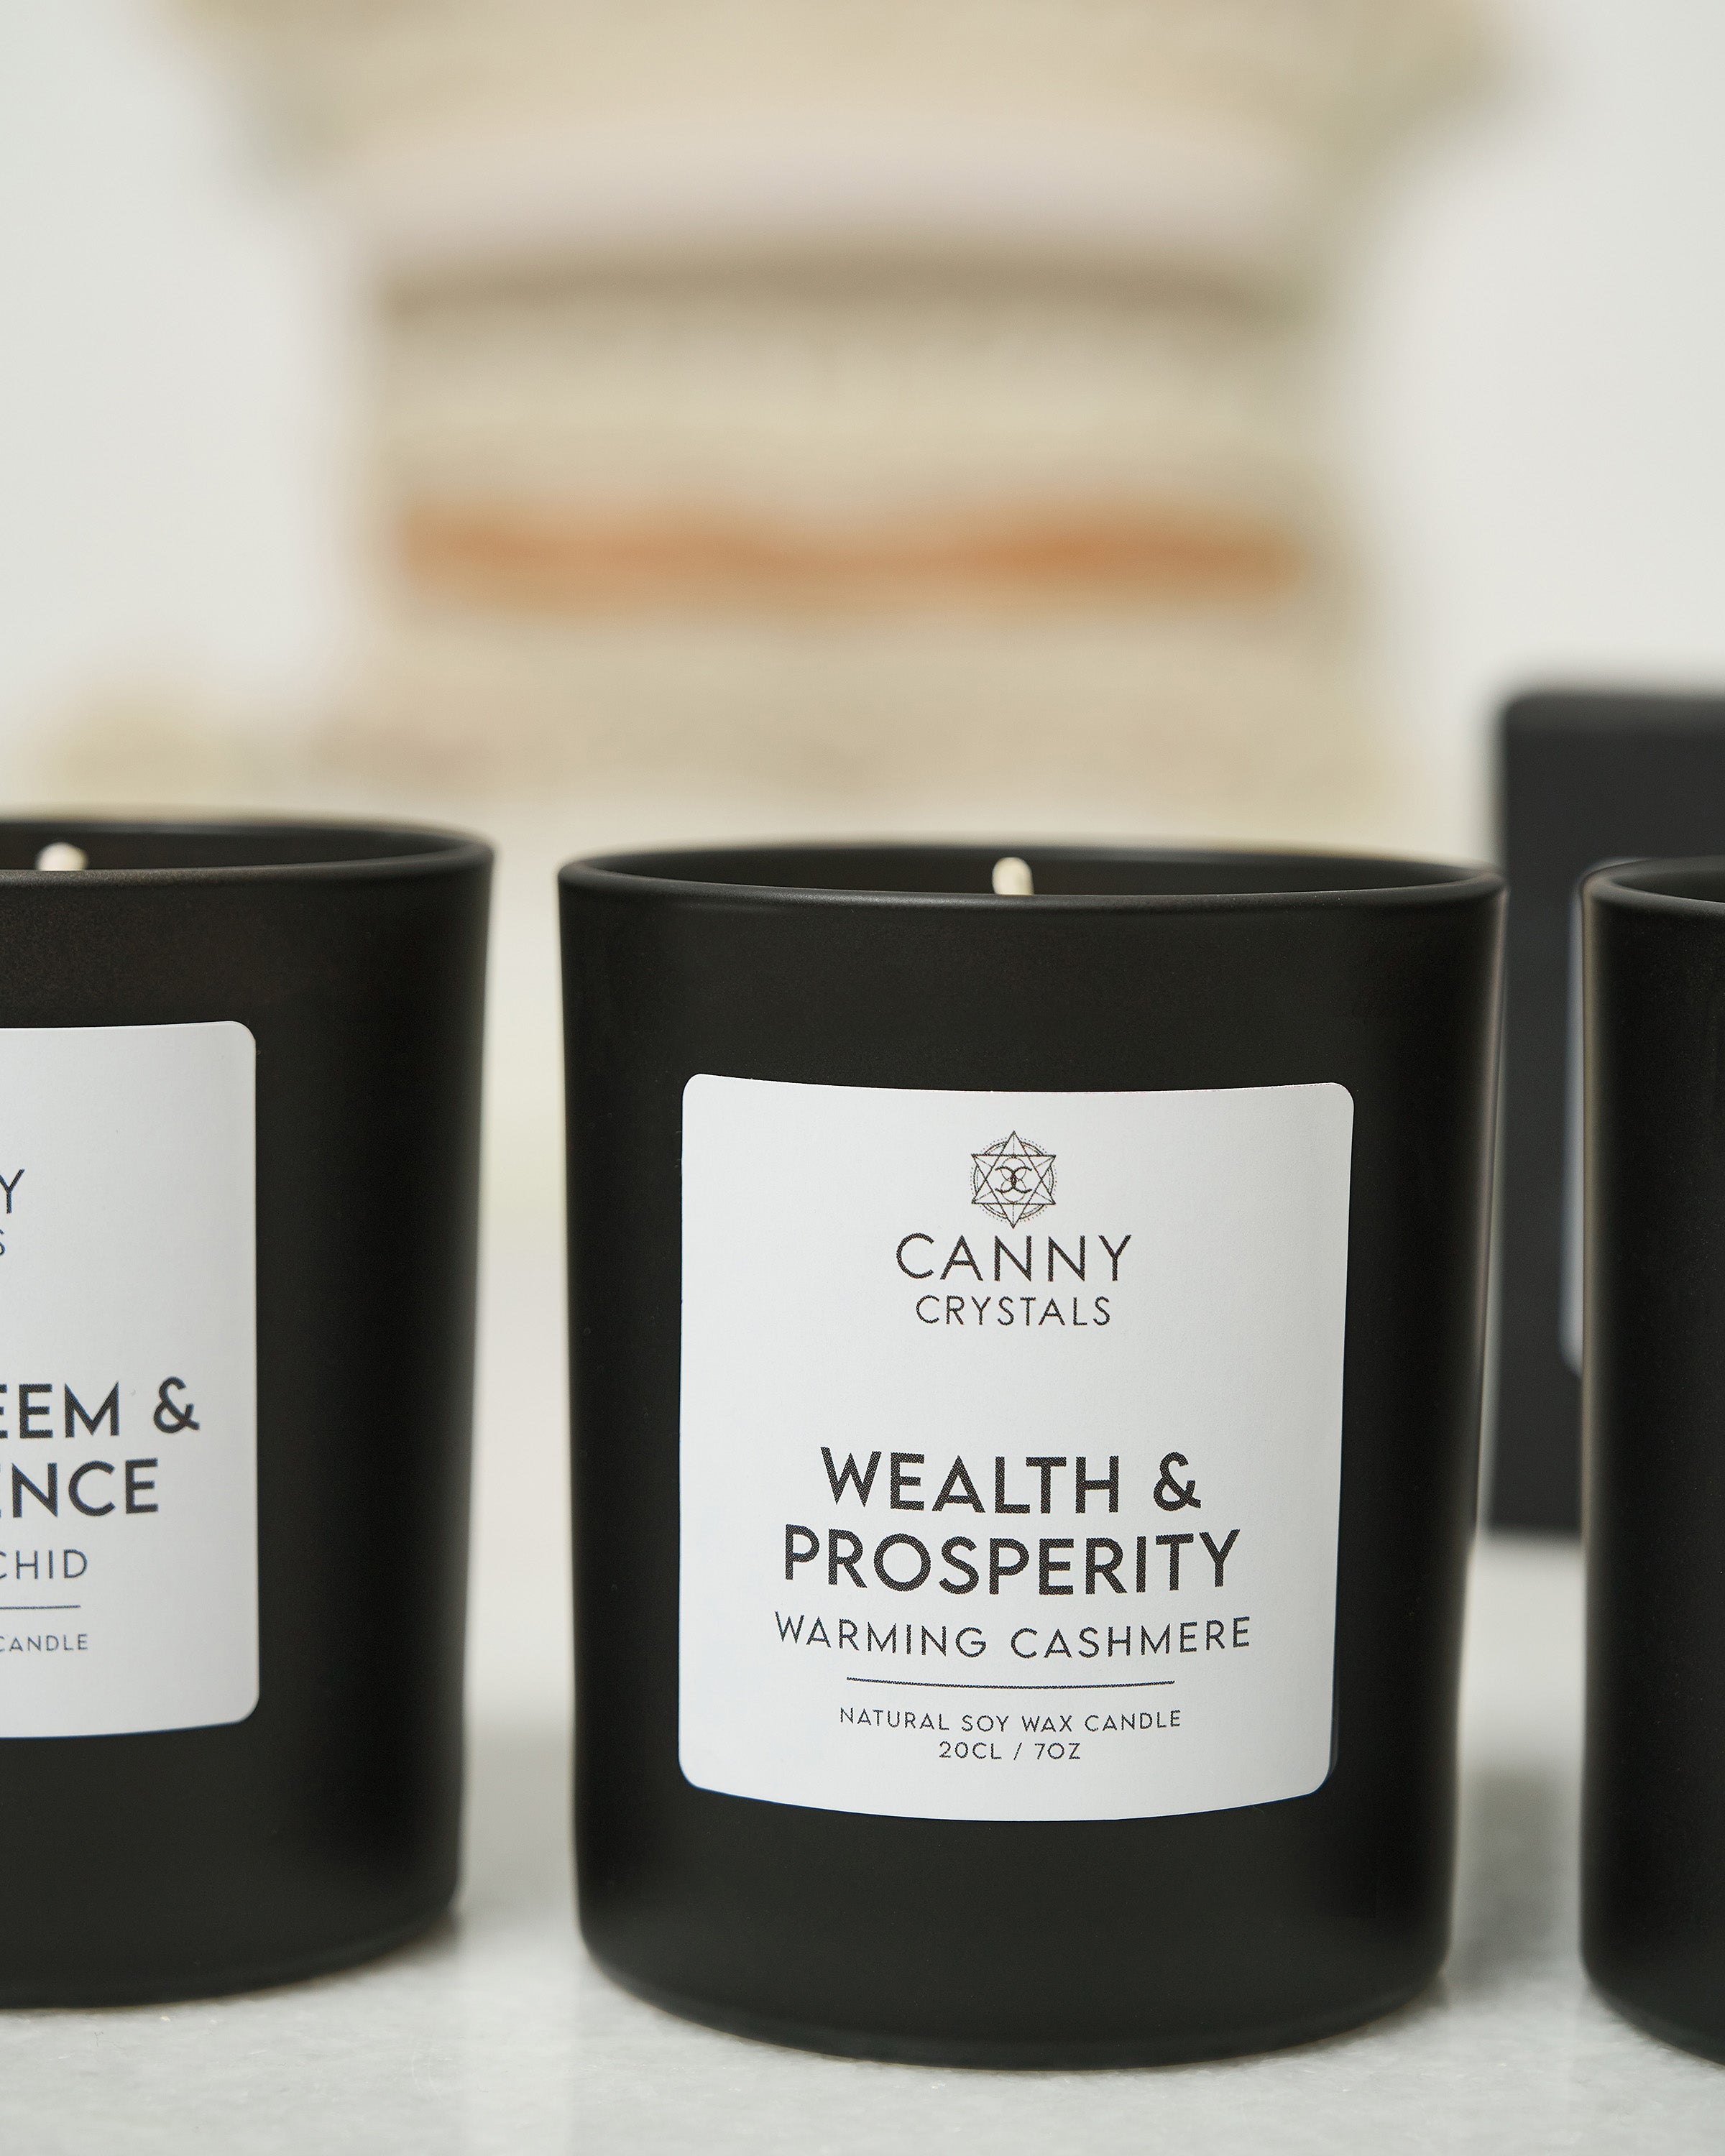 Affirmation candle - Health & Wellbeing